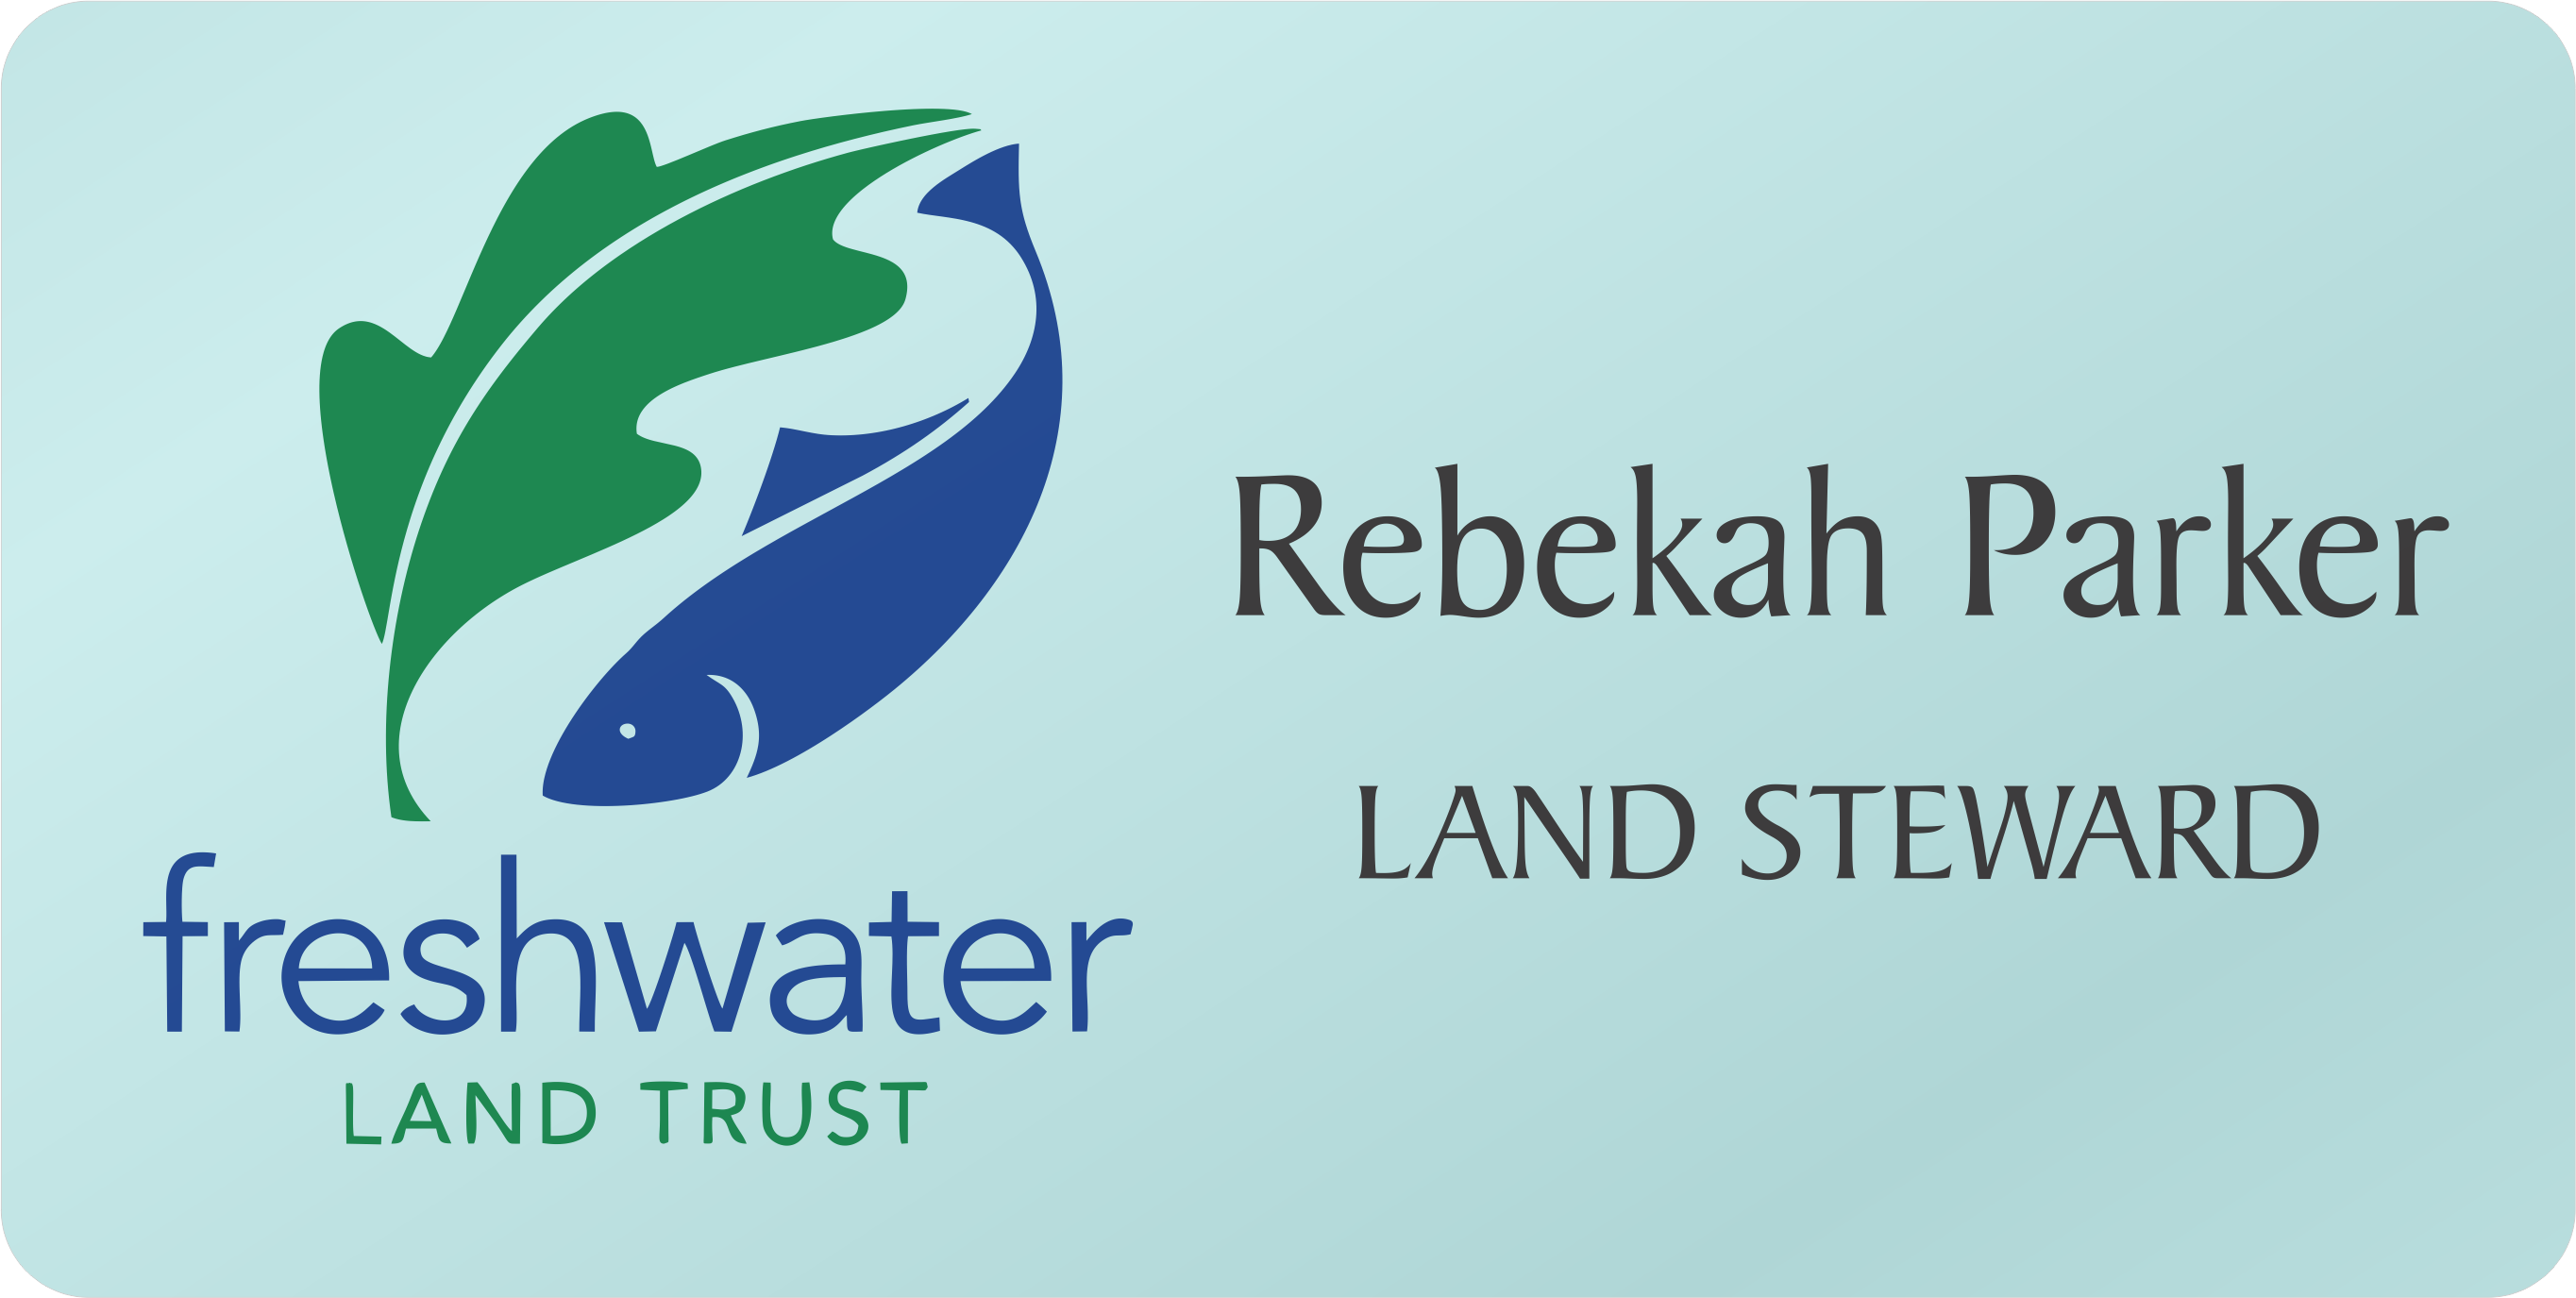 A business card featuring the logo for the Freshwater Land Trust in blue and green